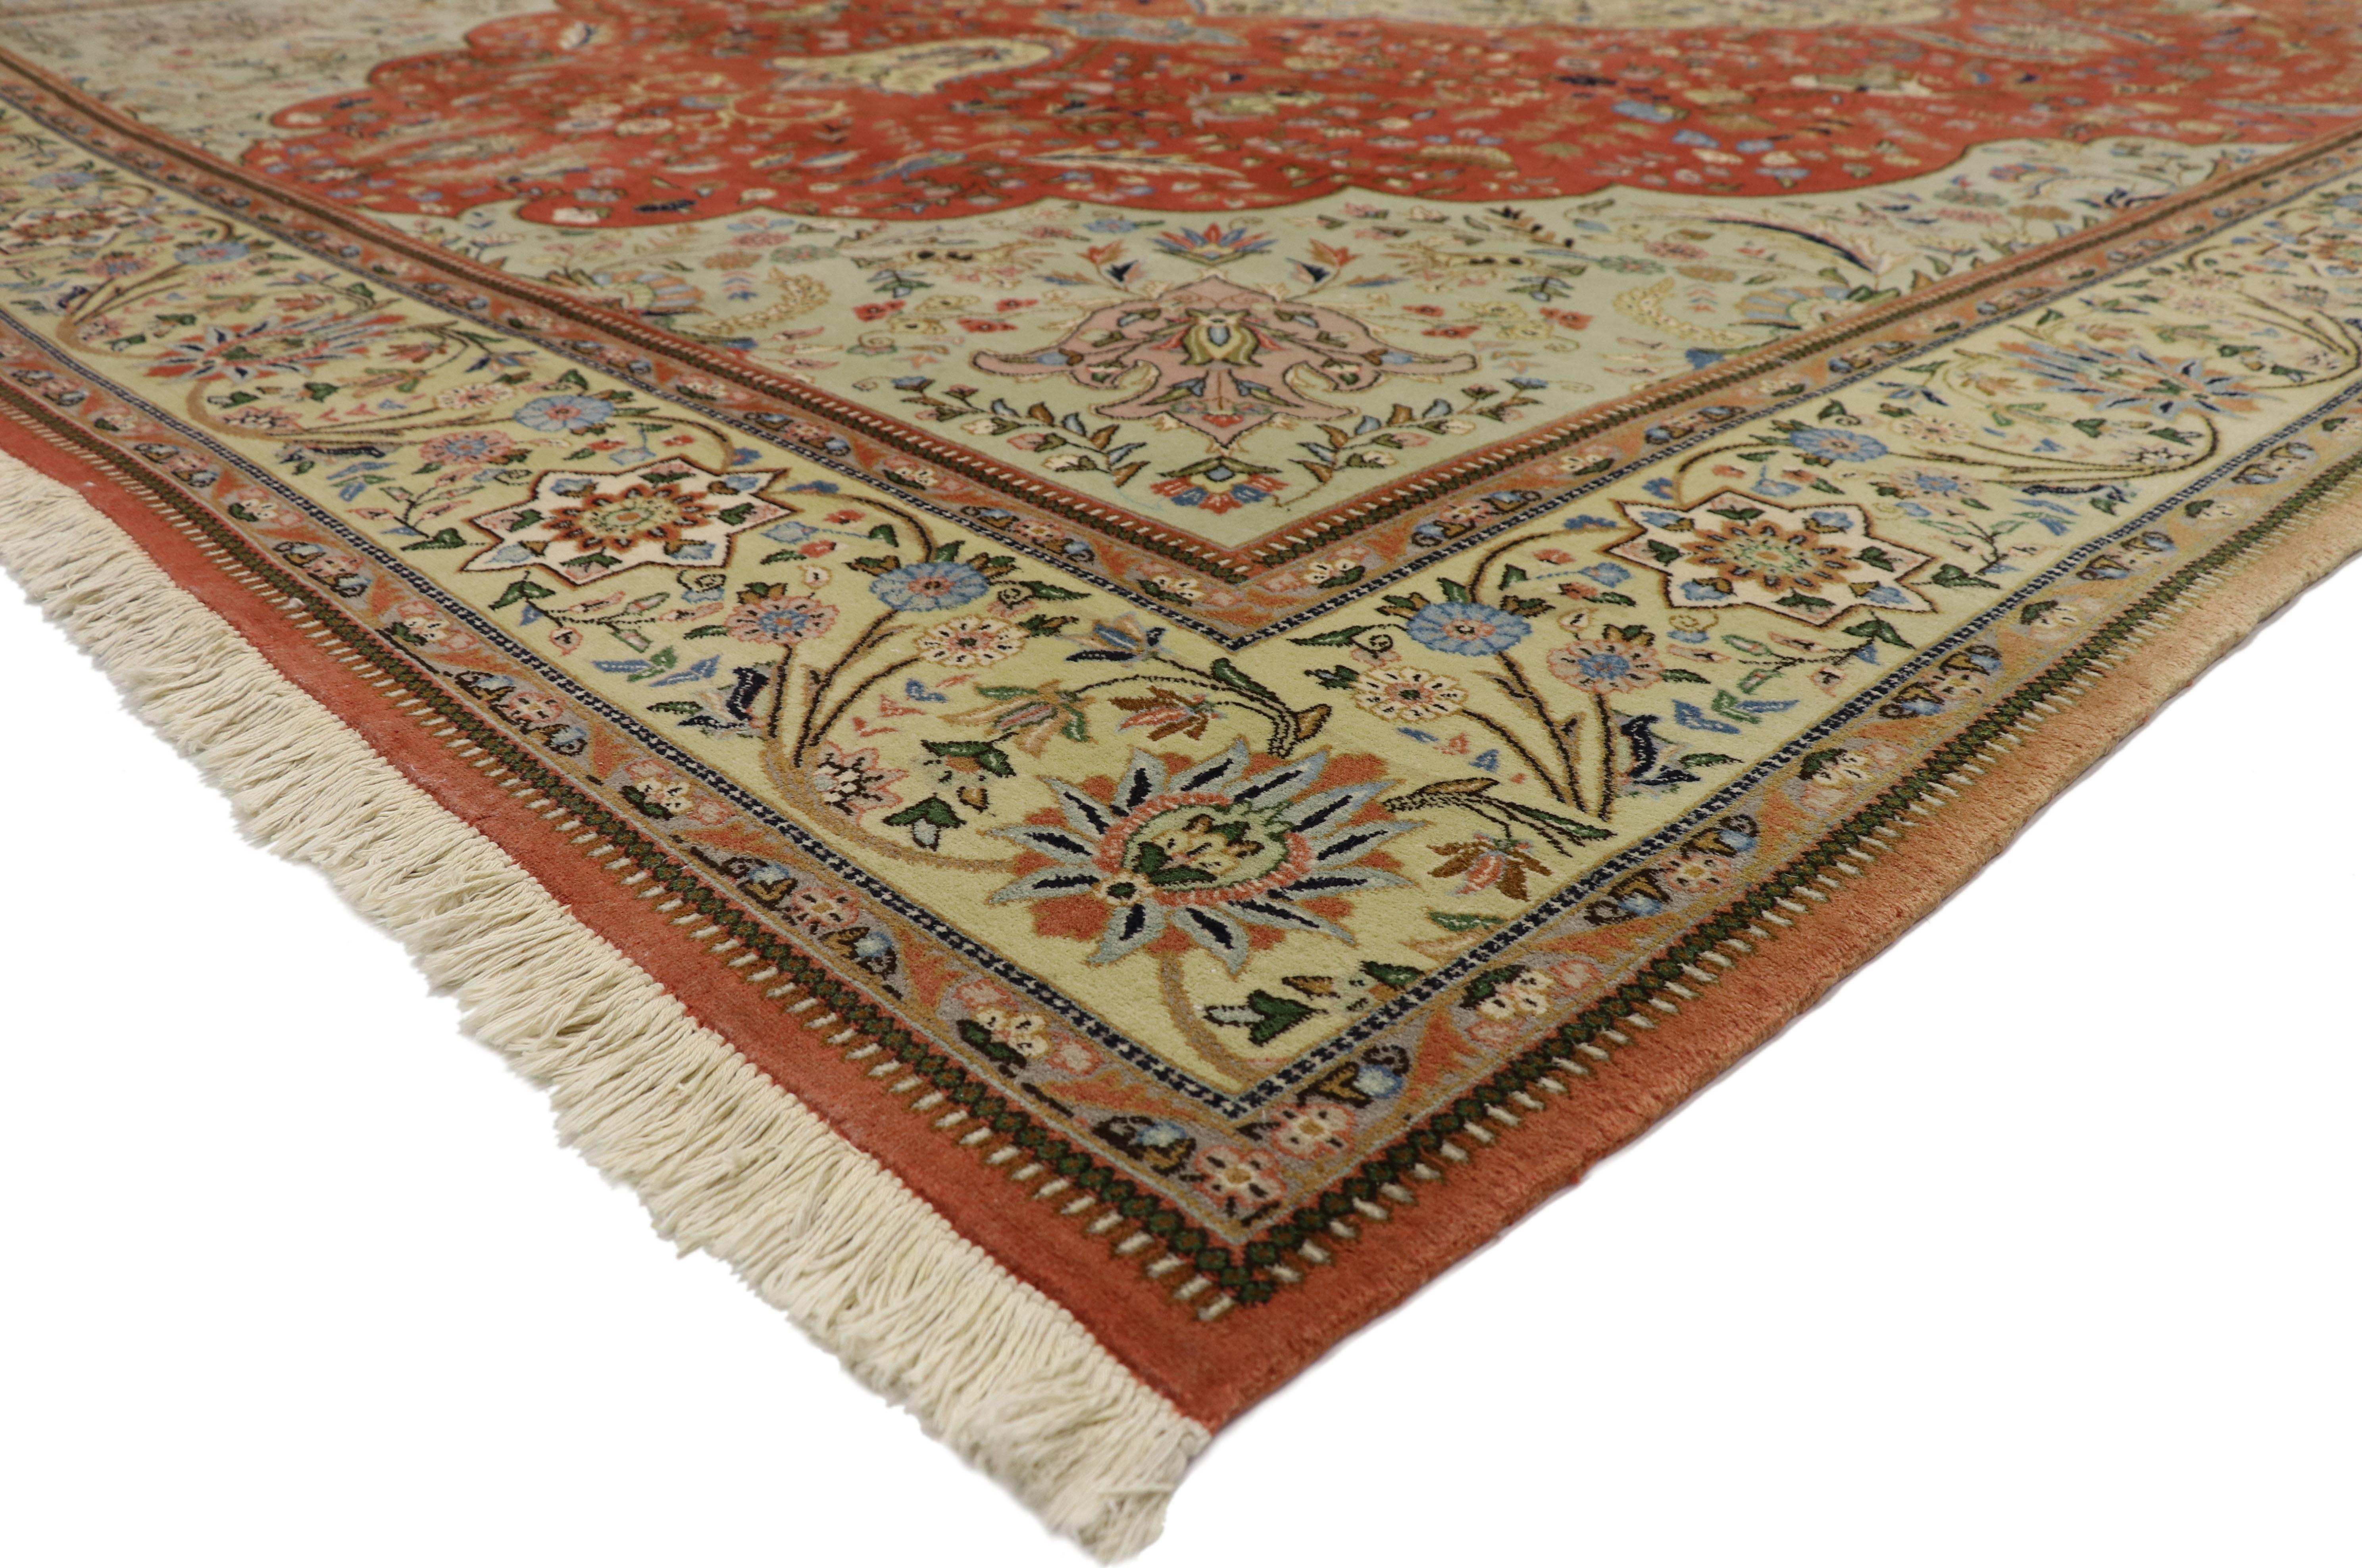 77353, vintage Persian Tabriz Palace size rug with Arts & Crafts Renaissance style. With it's timeless elegance and regal charm, this hand knotted wool vintage Persian Tabriz palace rug features a sixteen point scalloped medallion filled with flora